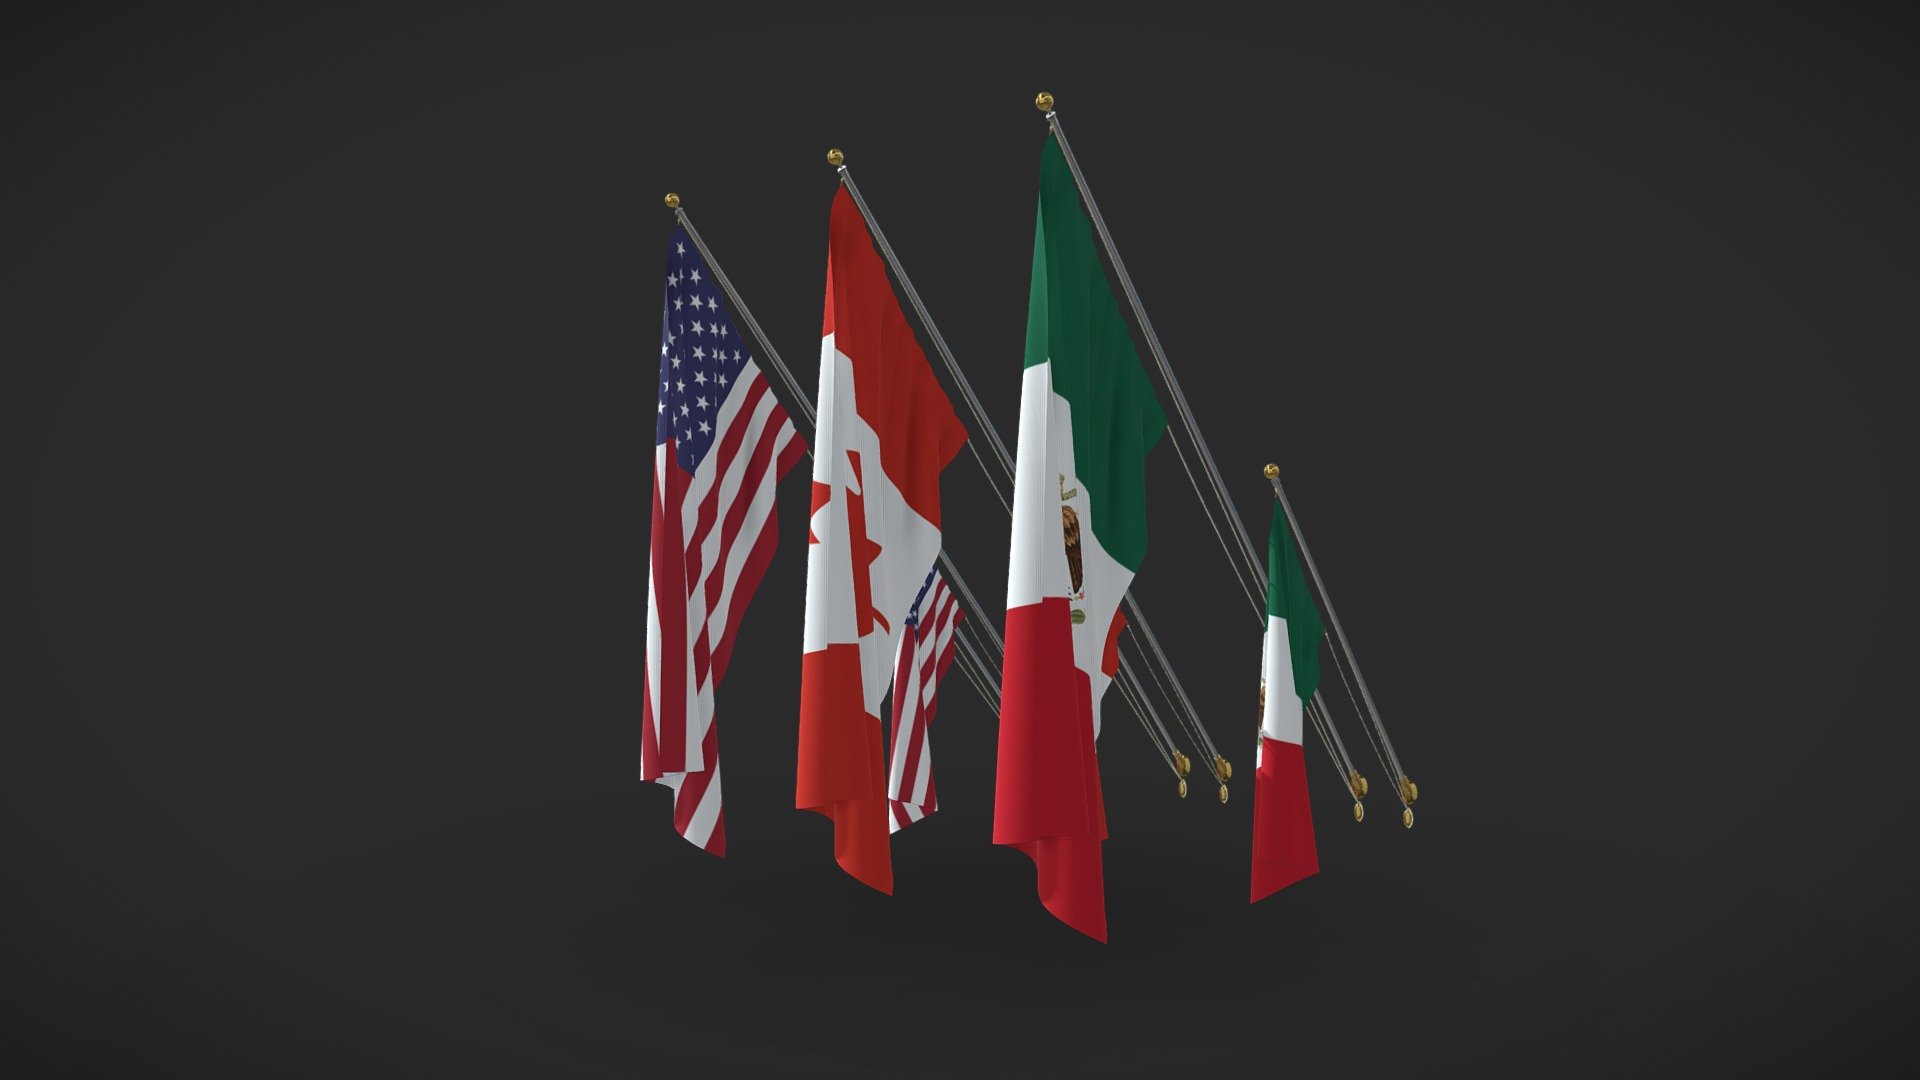 45 degree 15' Wall Mounted Flag Pole + 45 degree 8' Wall Mounted Flag Pole

About 50k poly per flag and flag pole.

Archviz Ready.
Flag Textures CC0

UV mapped, materials seperated for easy changes 3d model